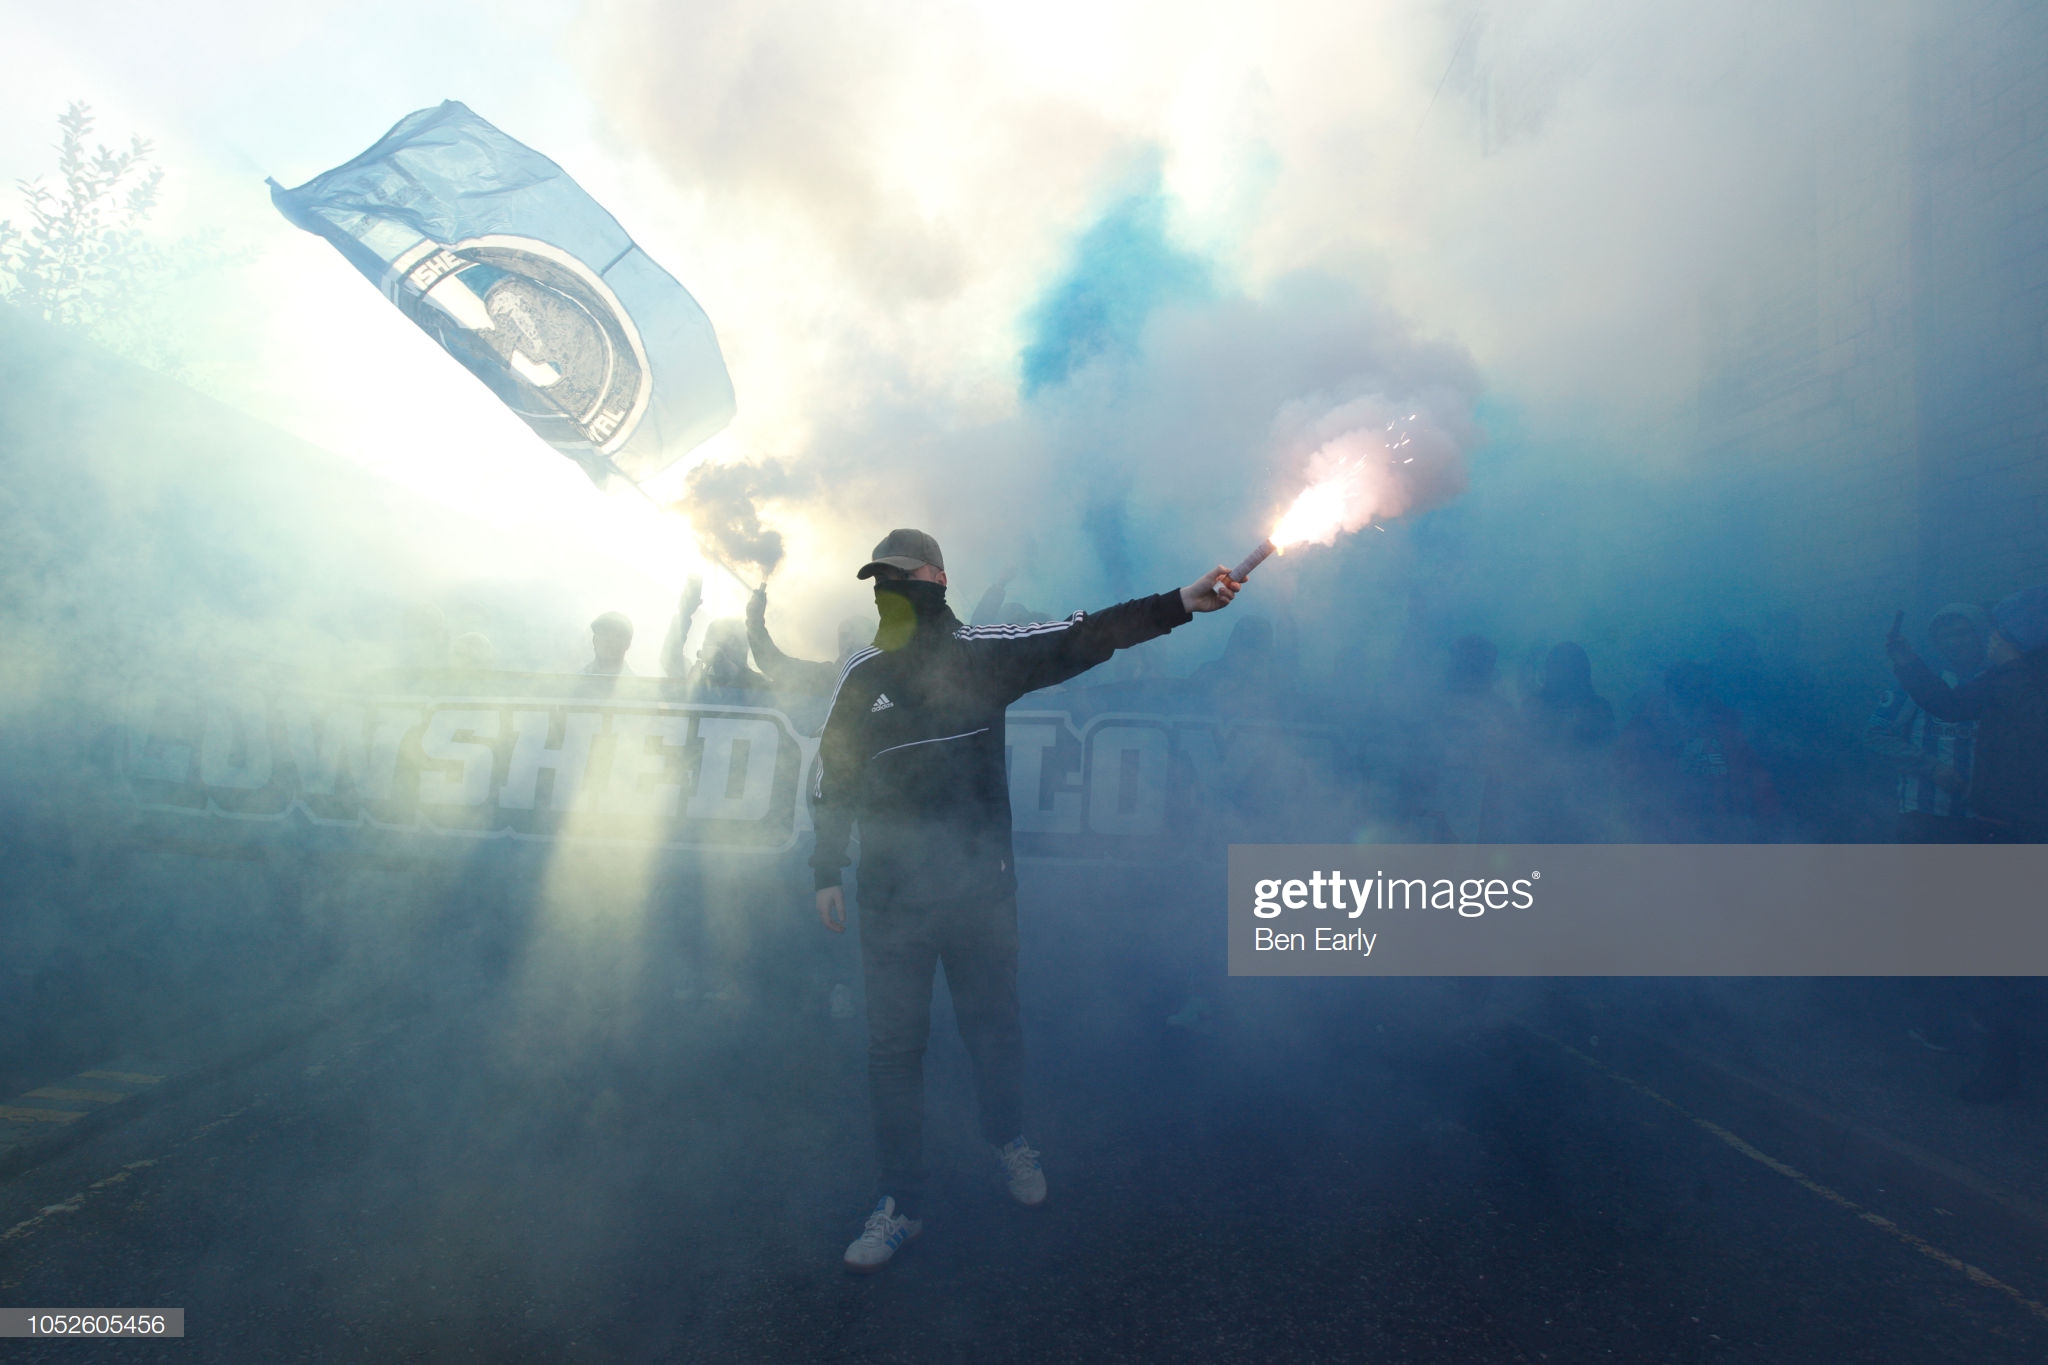 gettyimages-1052605456-2048x2048.jpg